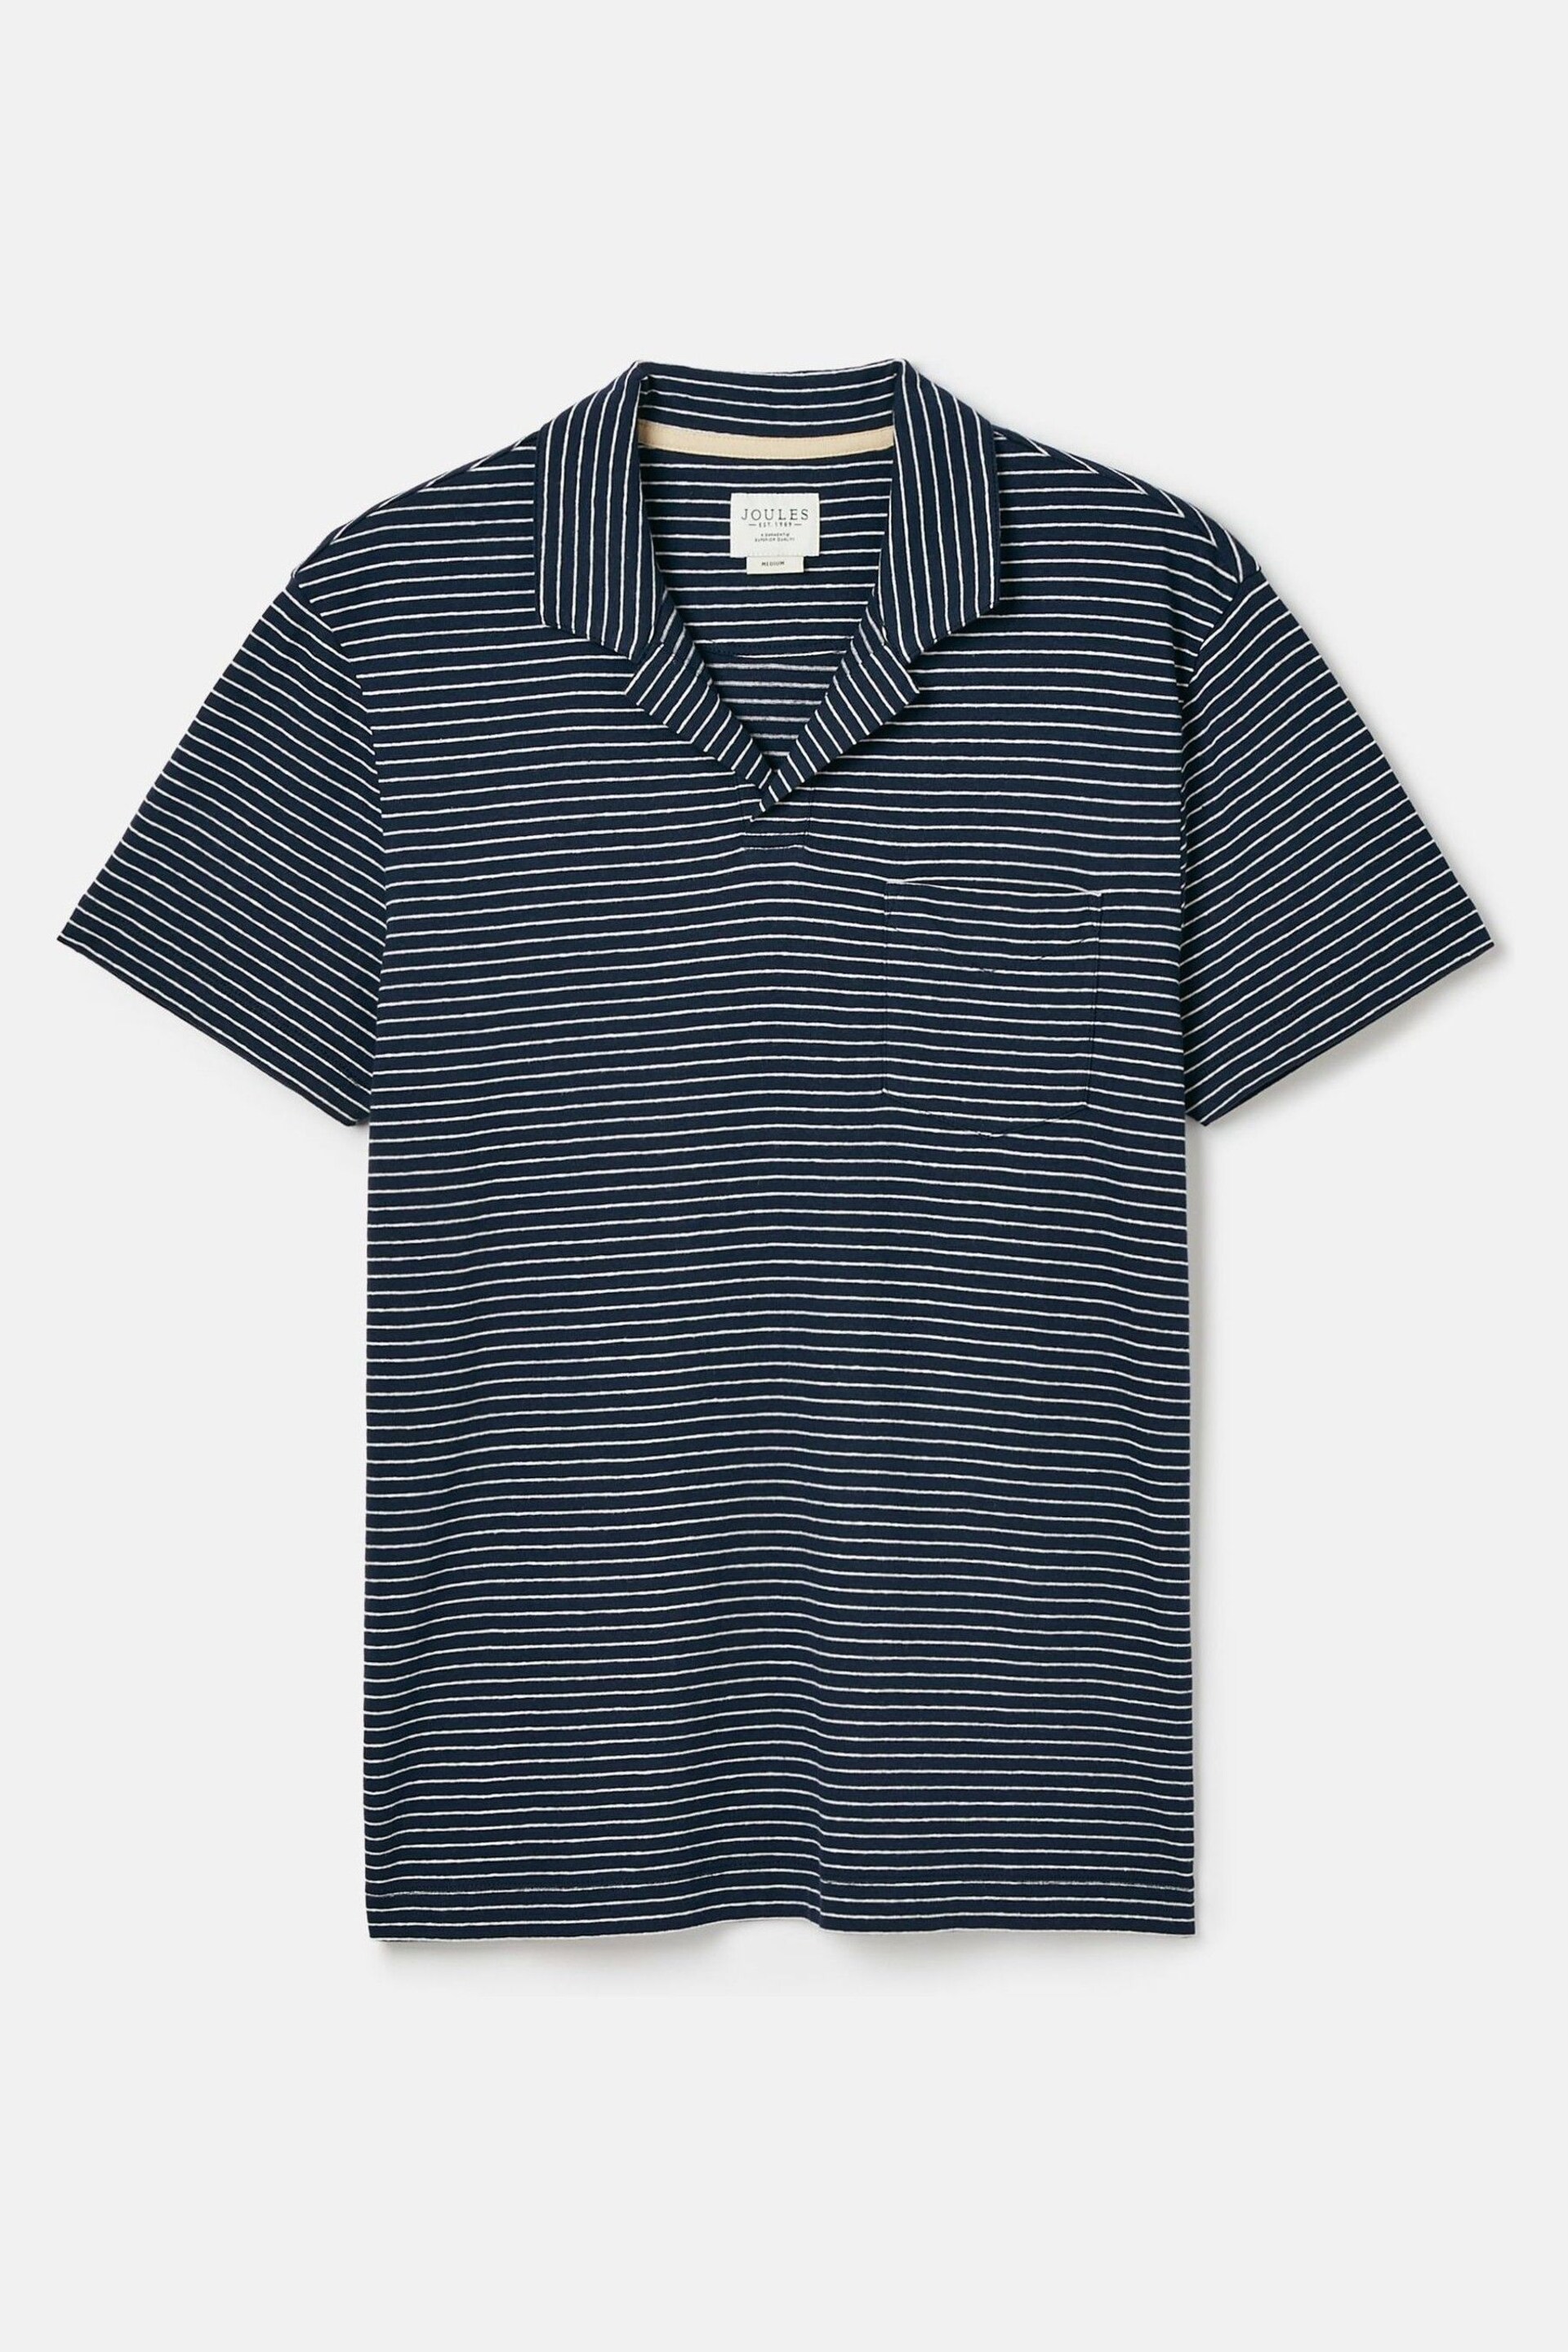 Joules Linen Blend Navy Blue Striped Polo Shirt - Image 9 of 9